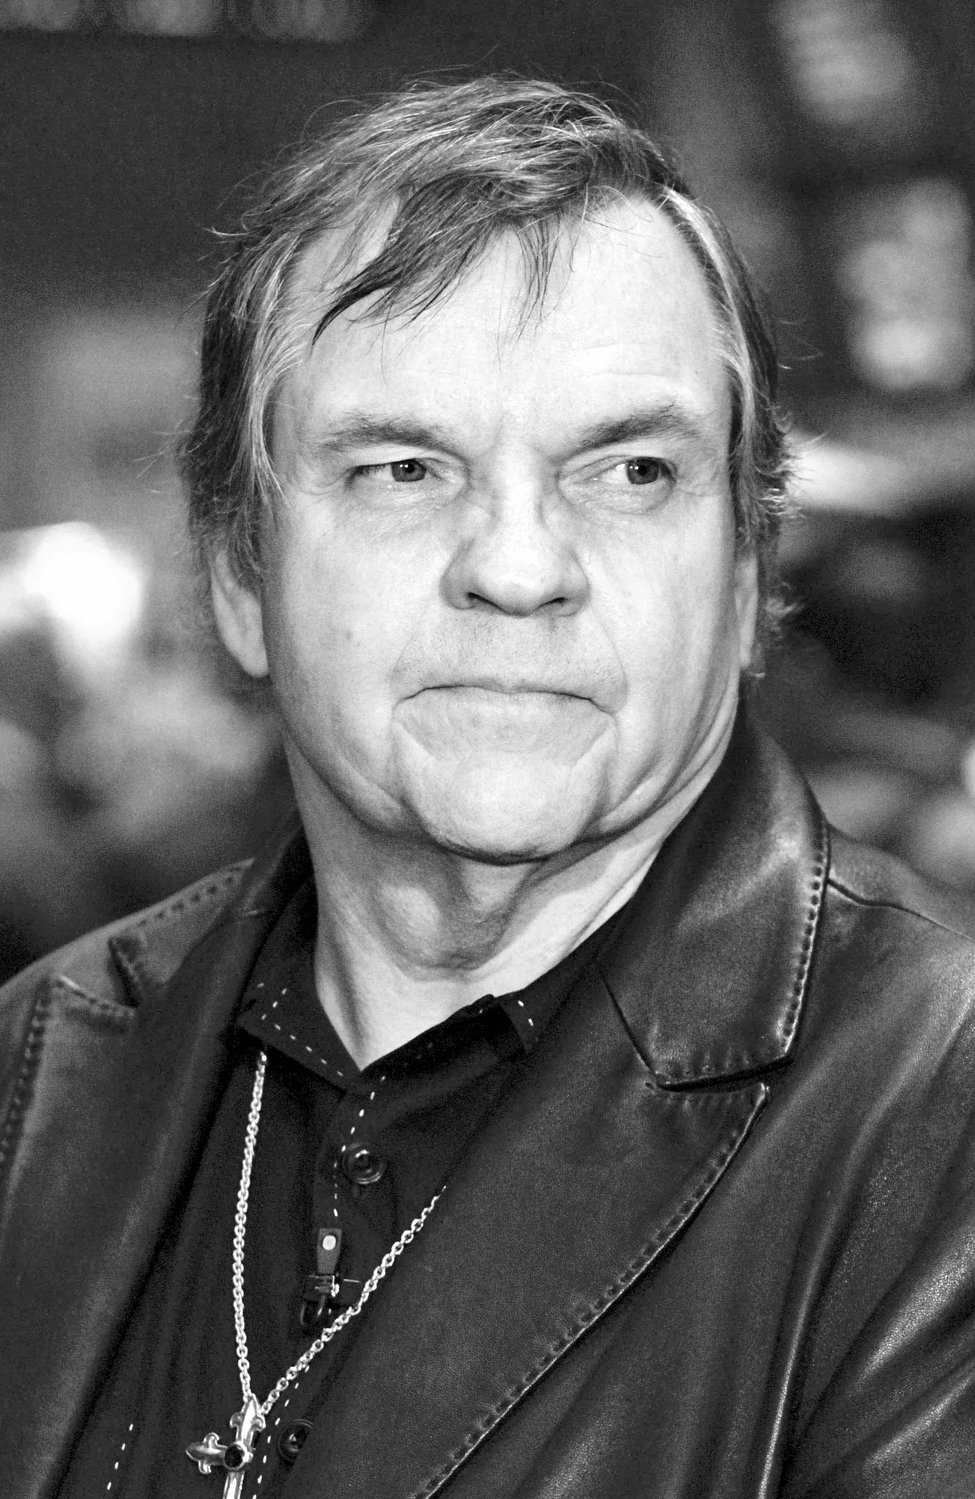 Meat Loaf, 'Bat Out of Hell' rock superstar, dies at 74 | Daily Sentinel